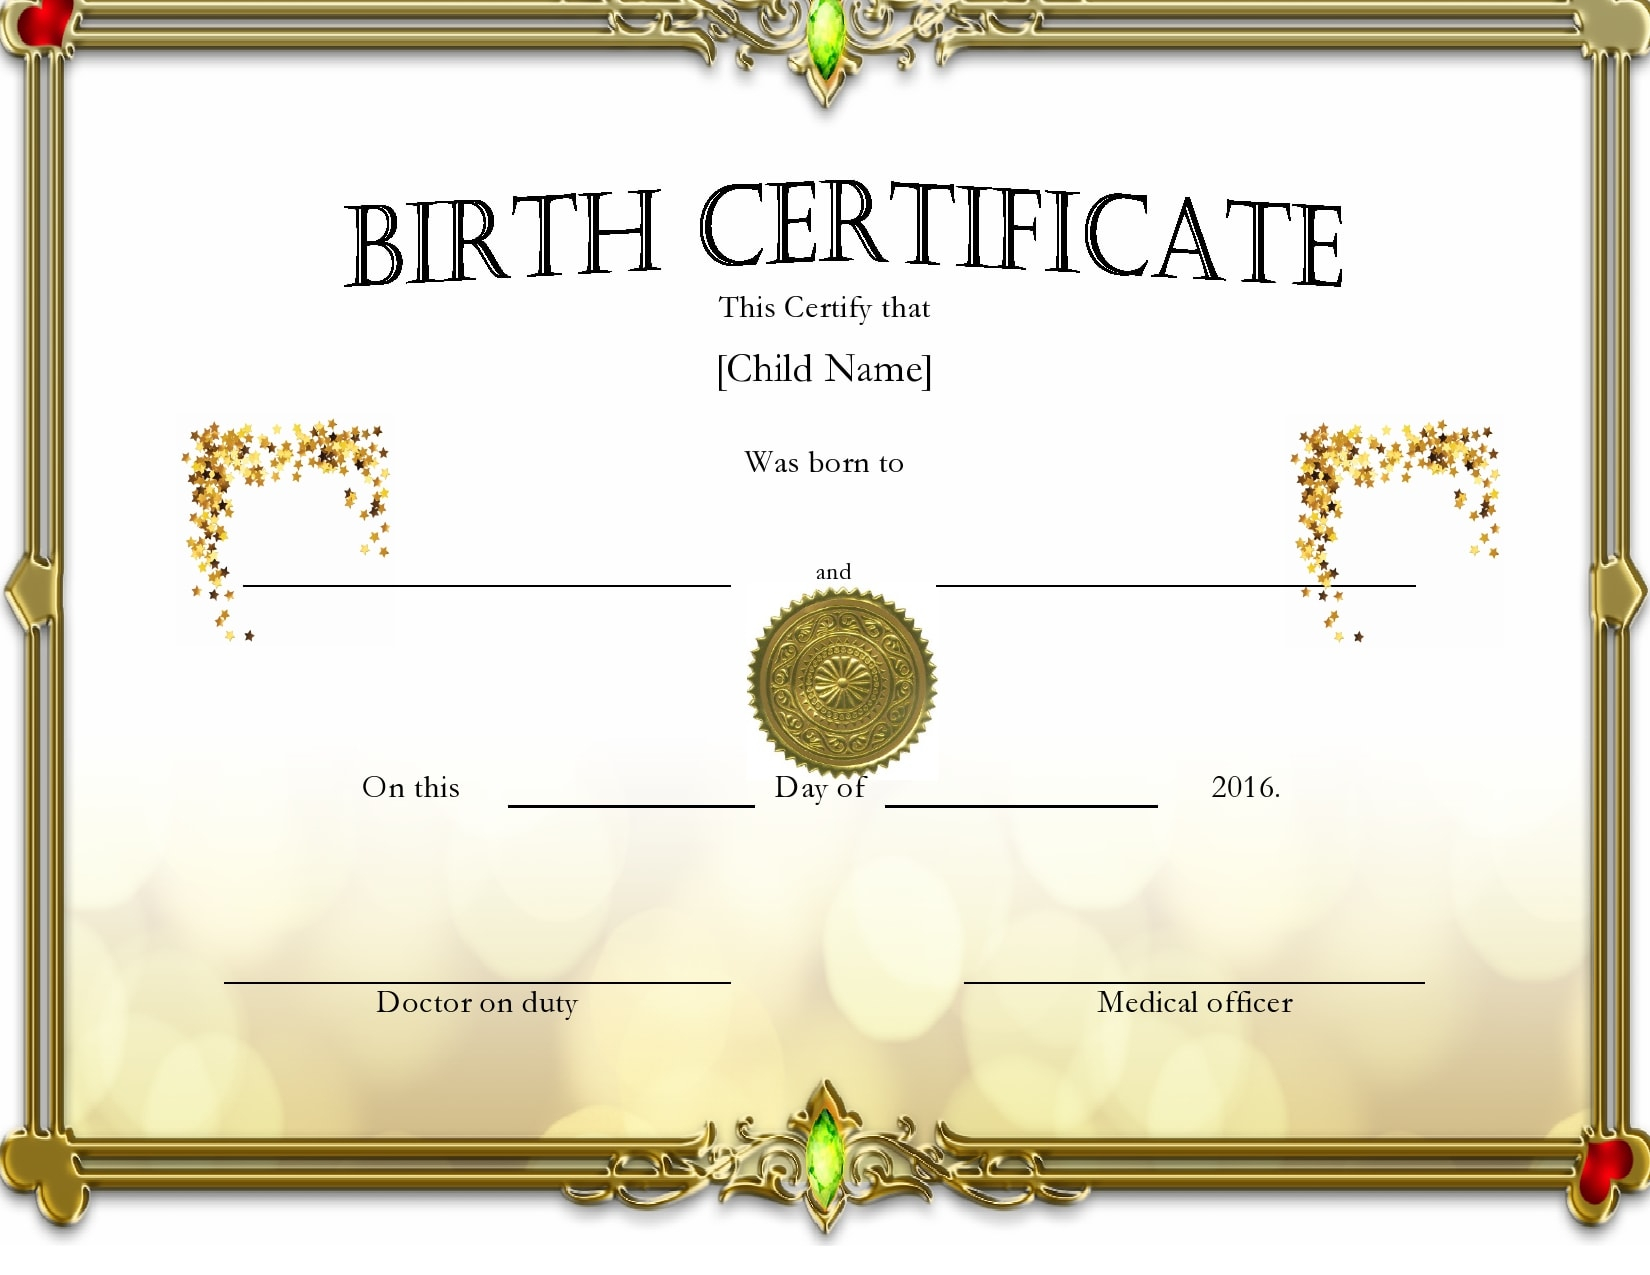 10 Blank Birth Certificate Templates (& Examples) - PrintableTemplates Within Fake Birth Certificate Template